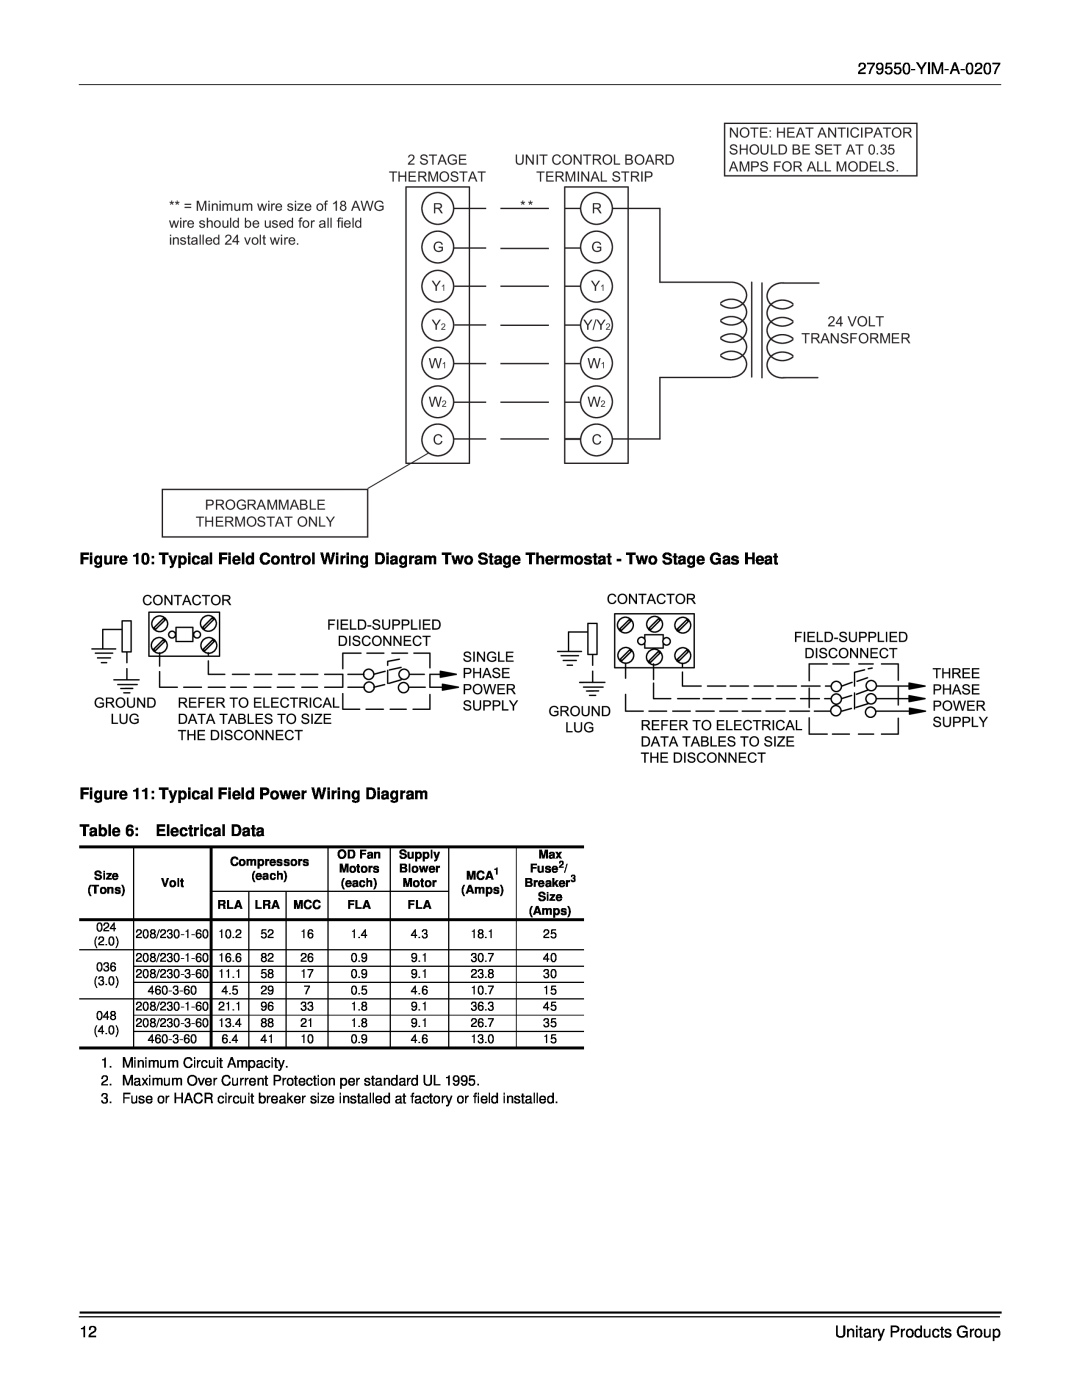 York R-410A Typical Field Power Wiring Diagram, Electrical Data, Minimum Circuit Ampacity, Unitary Products Group 